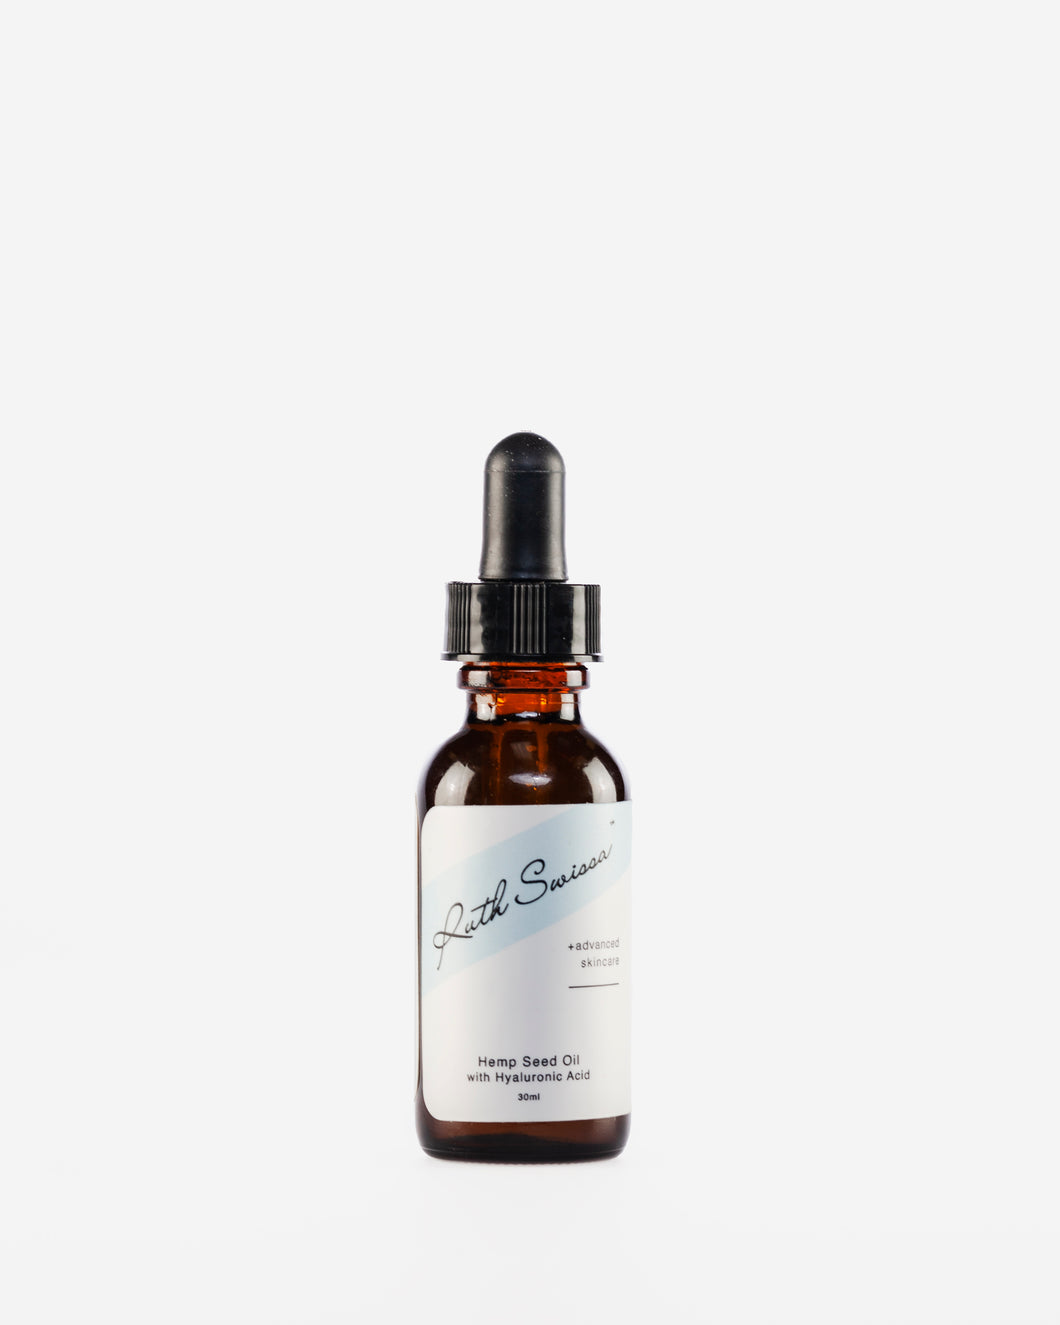 Hemp Seed Oil with Hyaluronic Acid